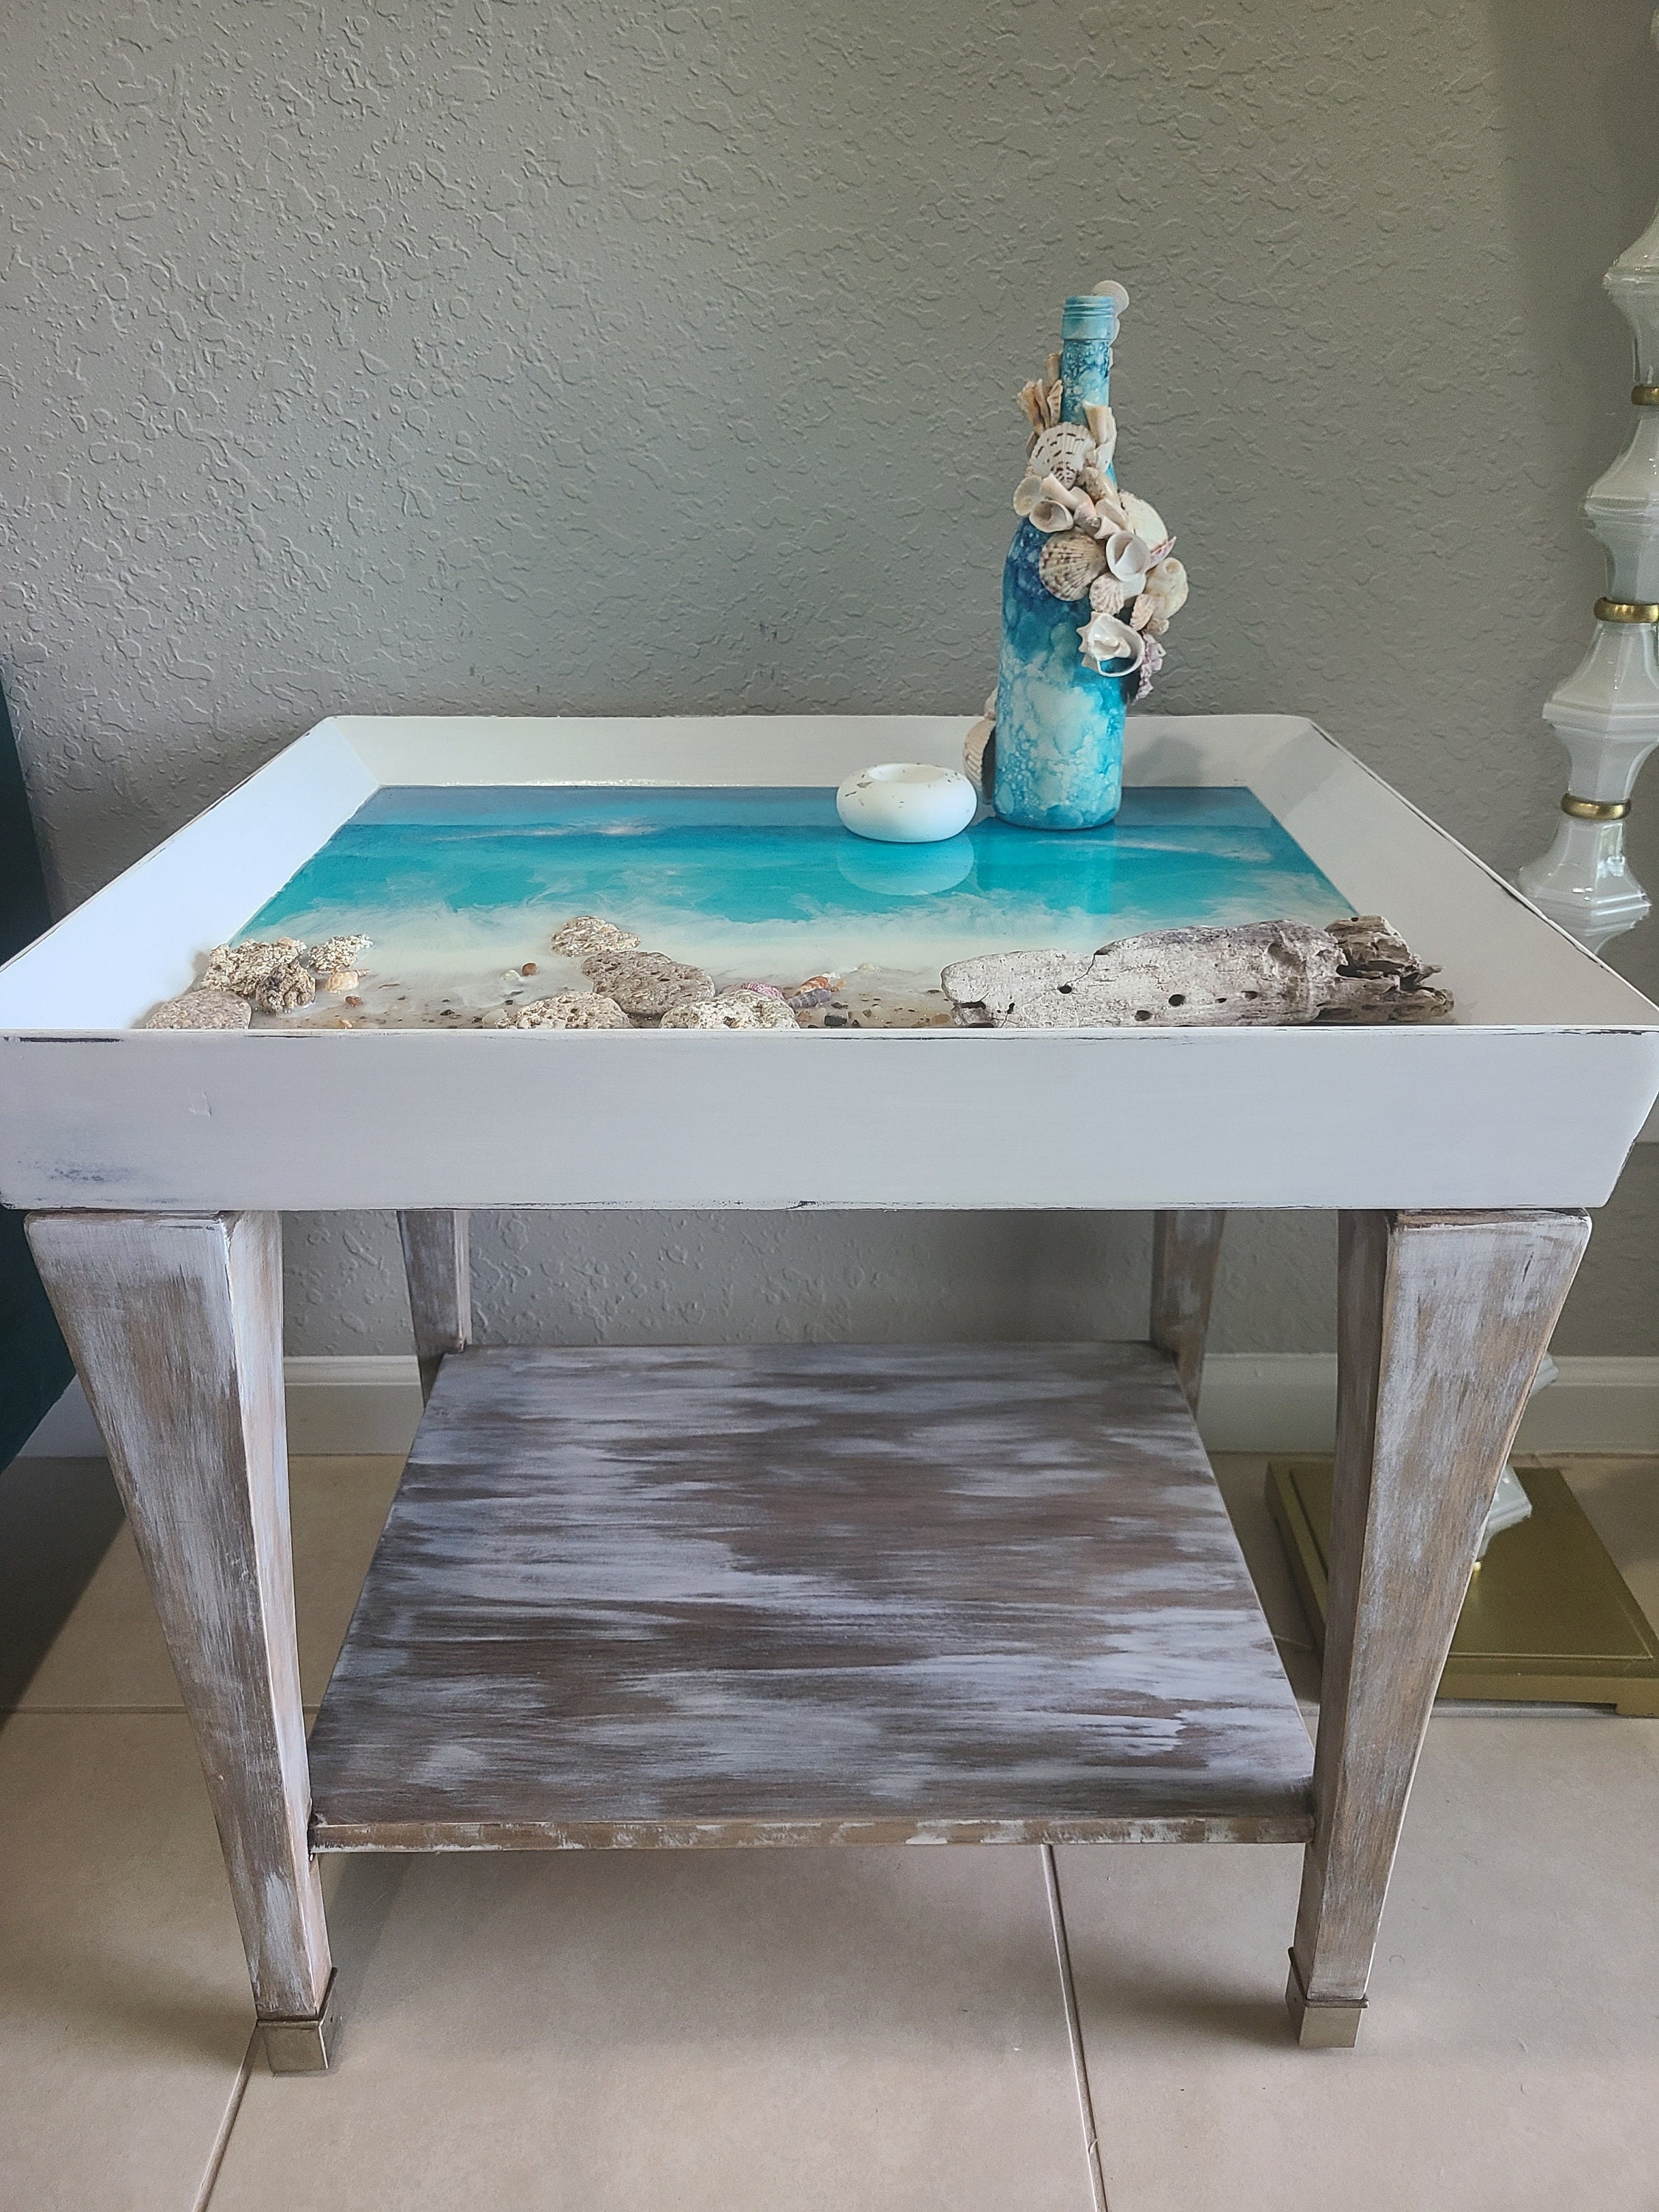 Dorian Nesting Sea Grass Tables, Set of 3 - Beach Style - Side Tables And  End Tables - by Cottage & Bungalow, Houzz